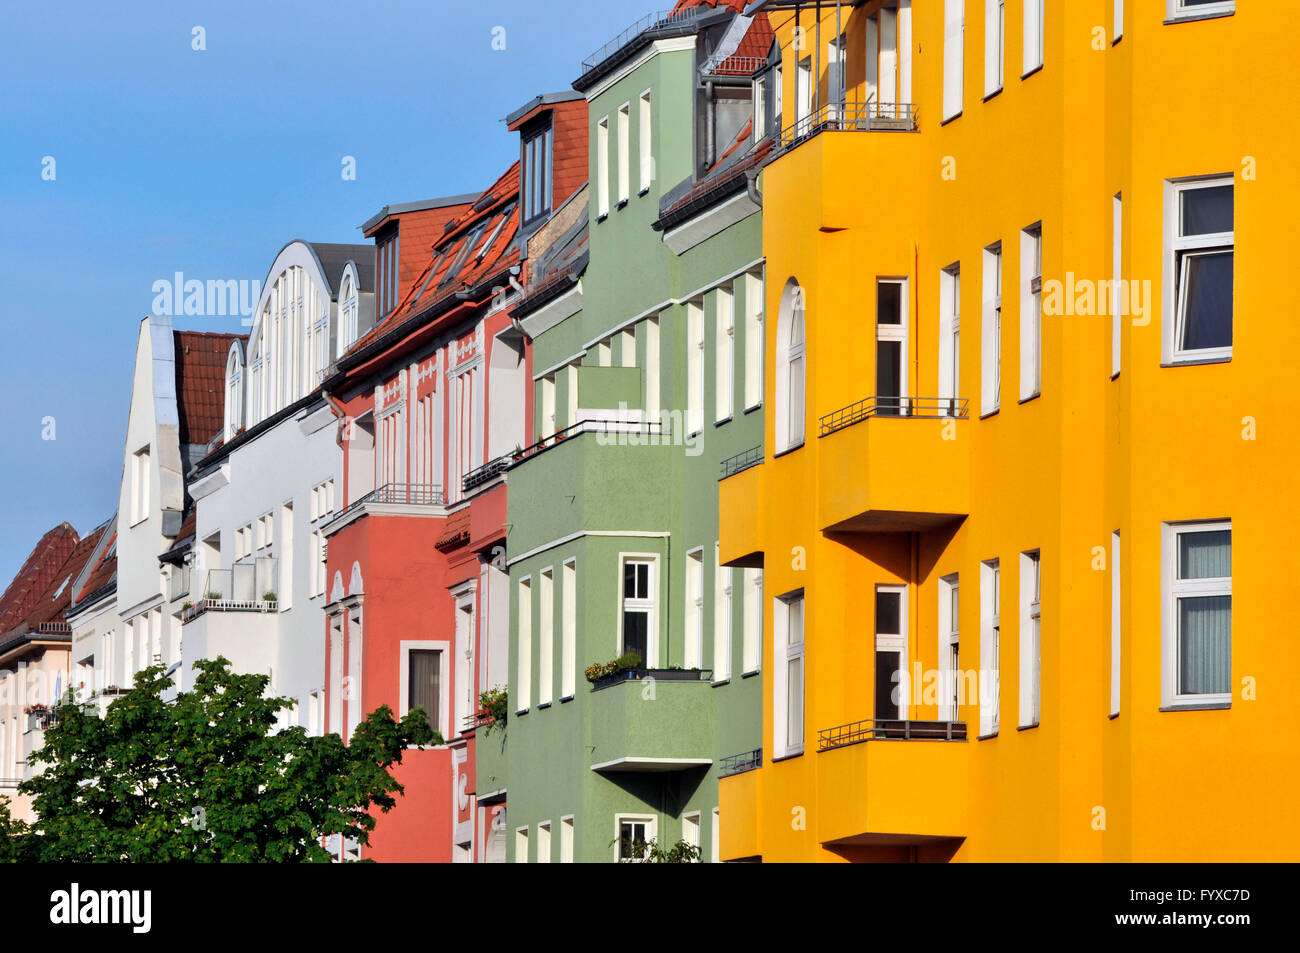 Old appartment houses, Philippistrasse, Friedenau, Berlin, Germany Stock Photo